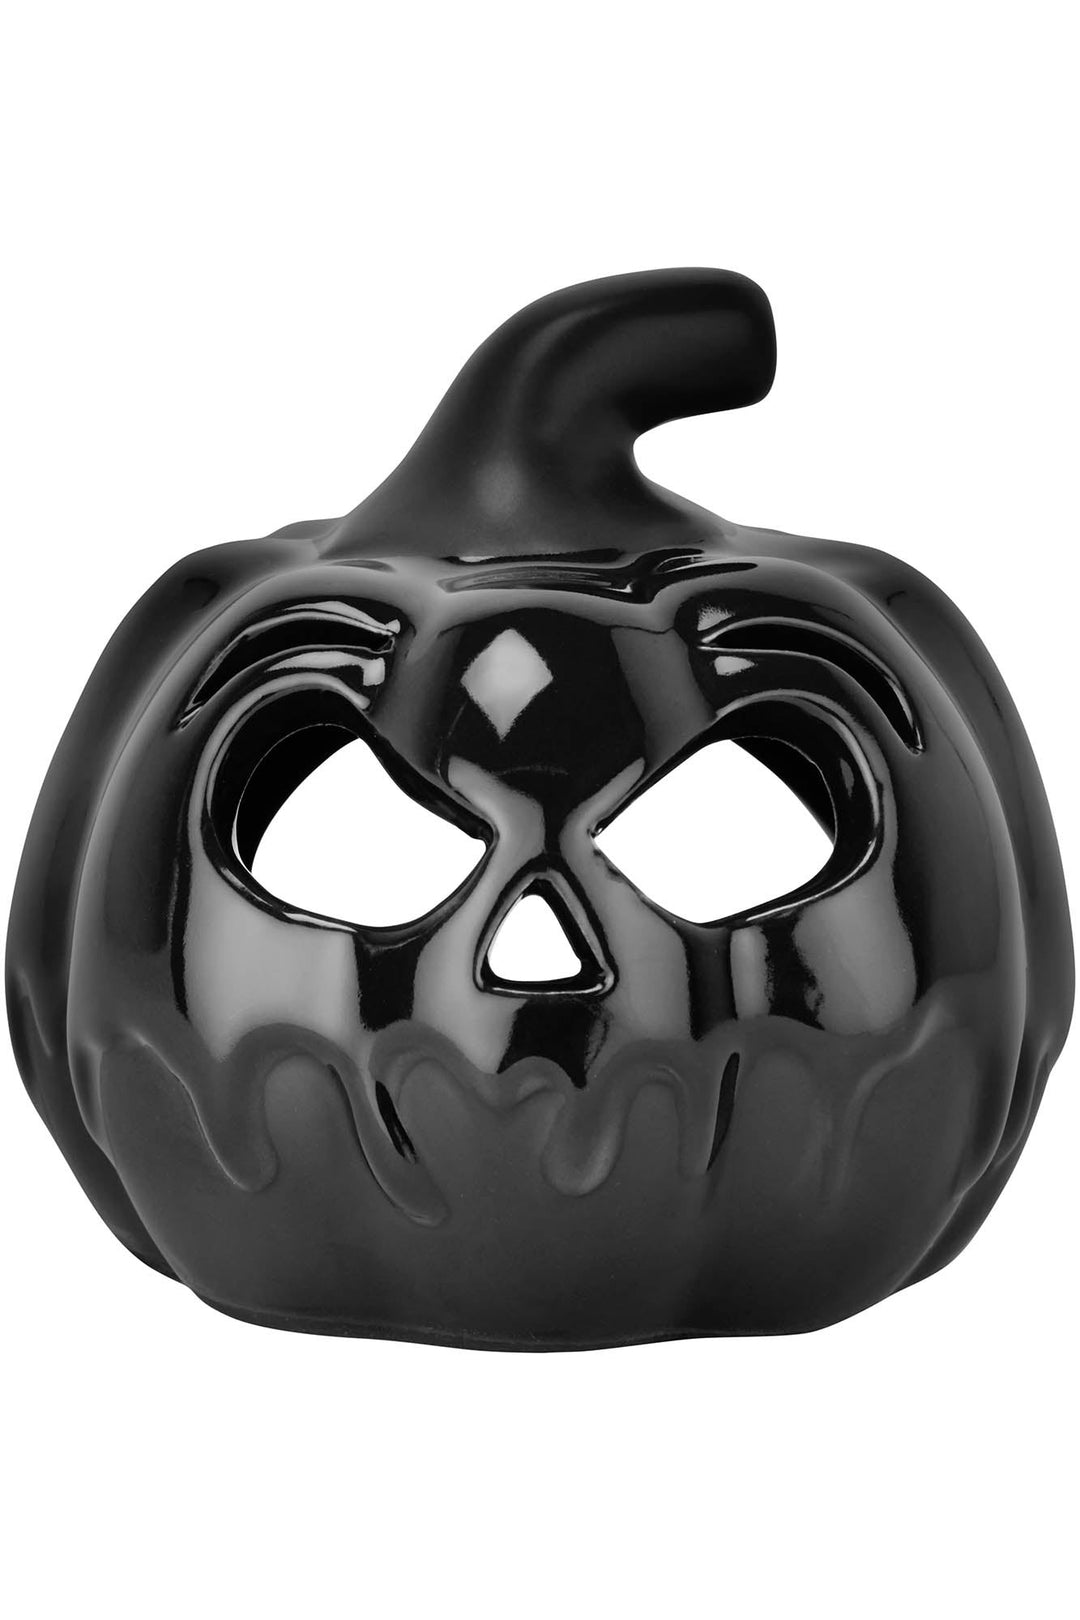 gothic tealight candle holder